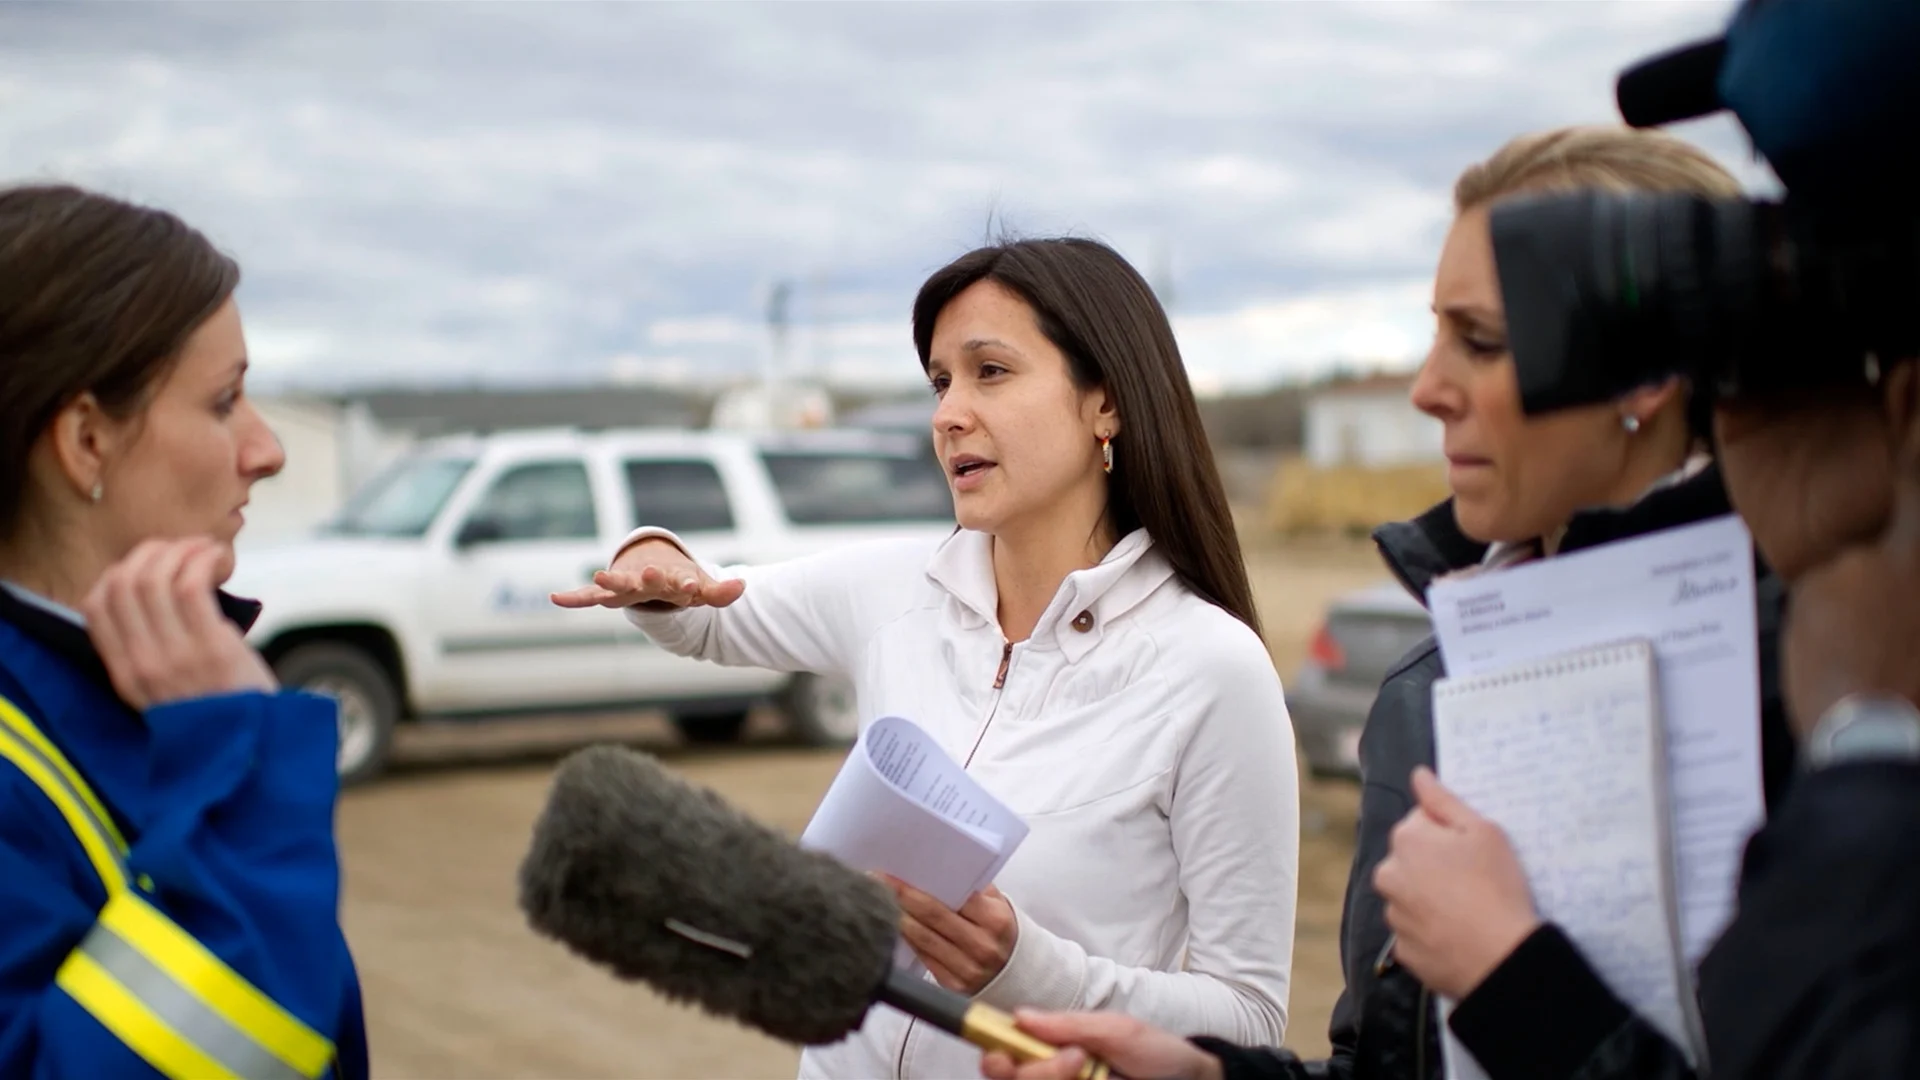 Laboucan-Massimo (centre) speaking with reporters in Episode 1. (Power to the People)